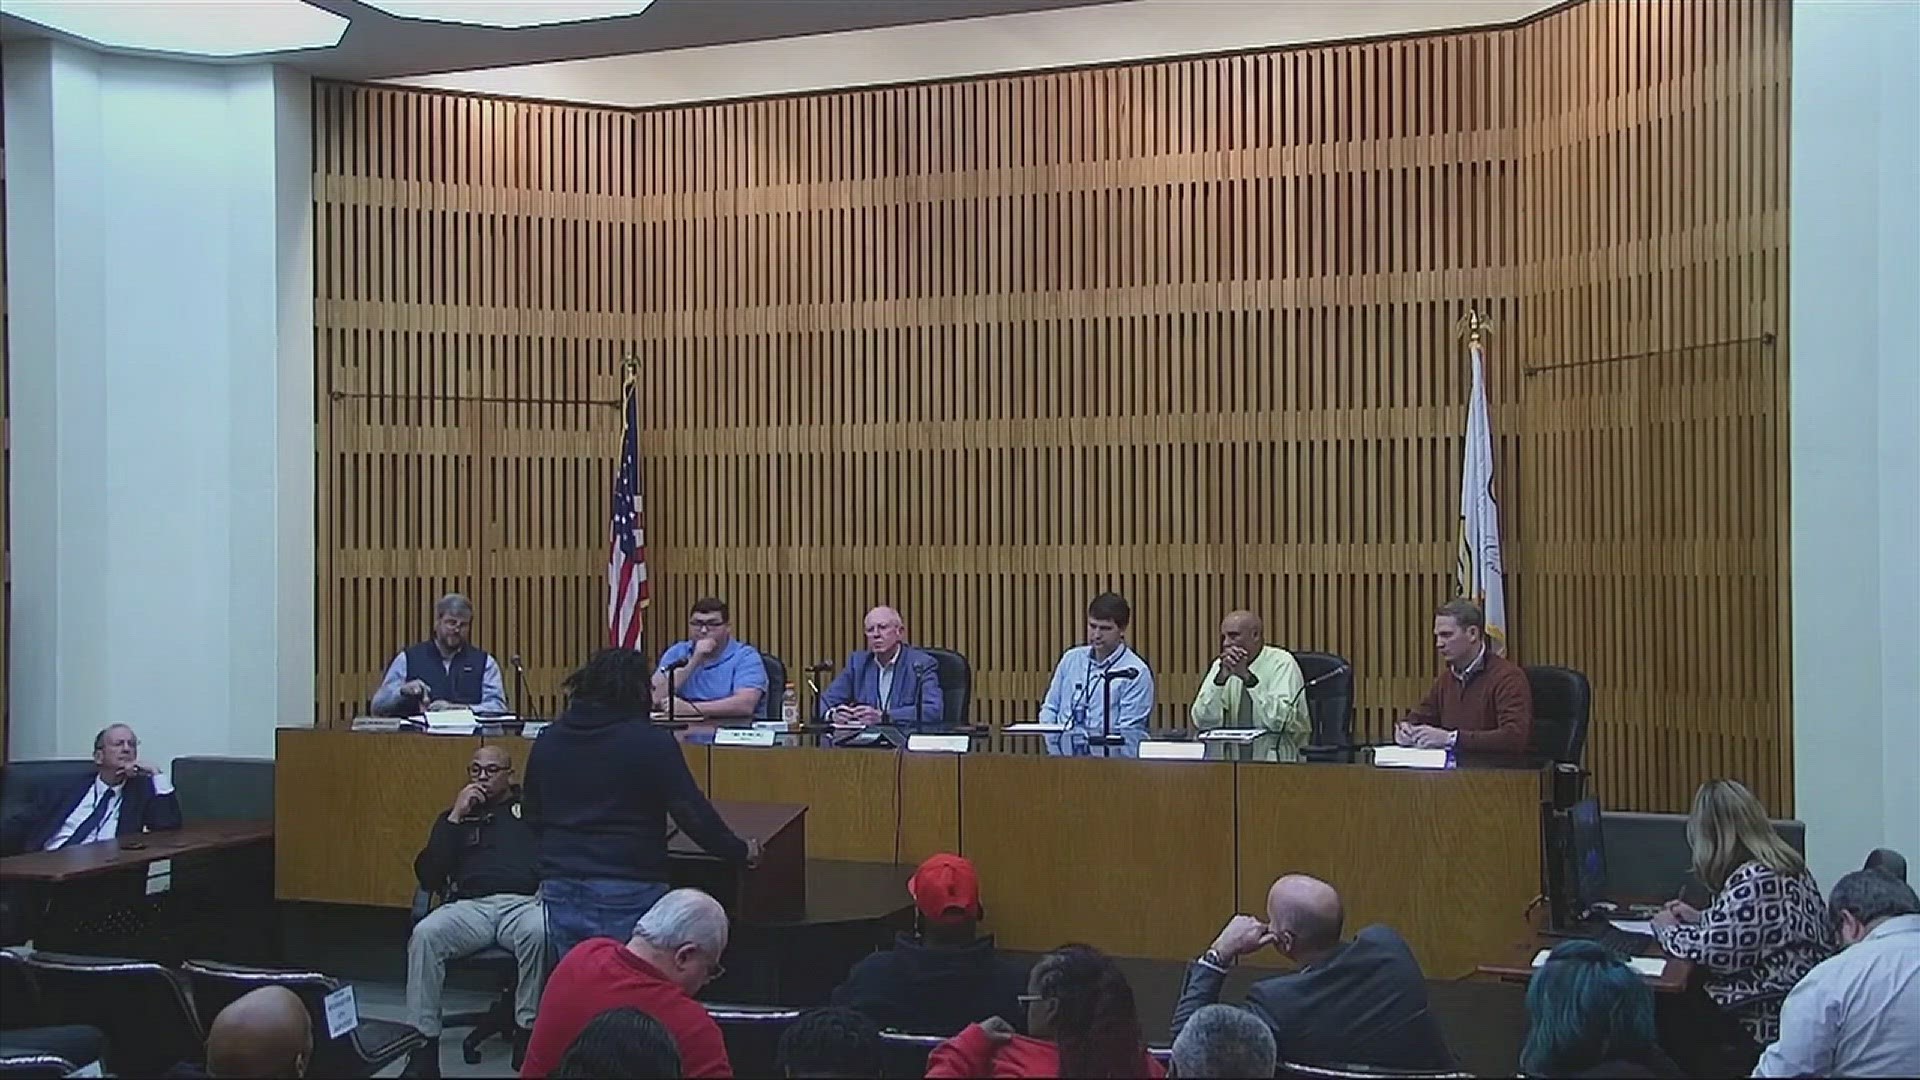 Calls for the councilman to be censured, fired, or to resign were voices by many residents after his support of fired officers.